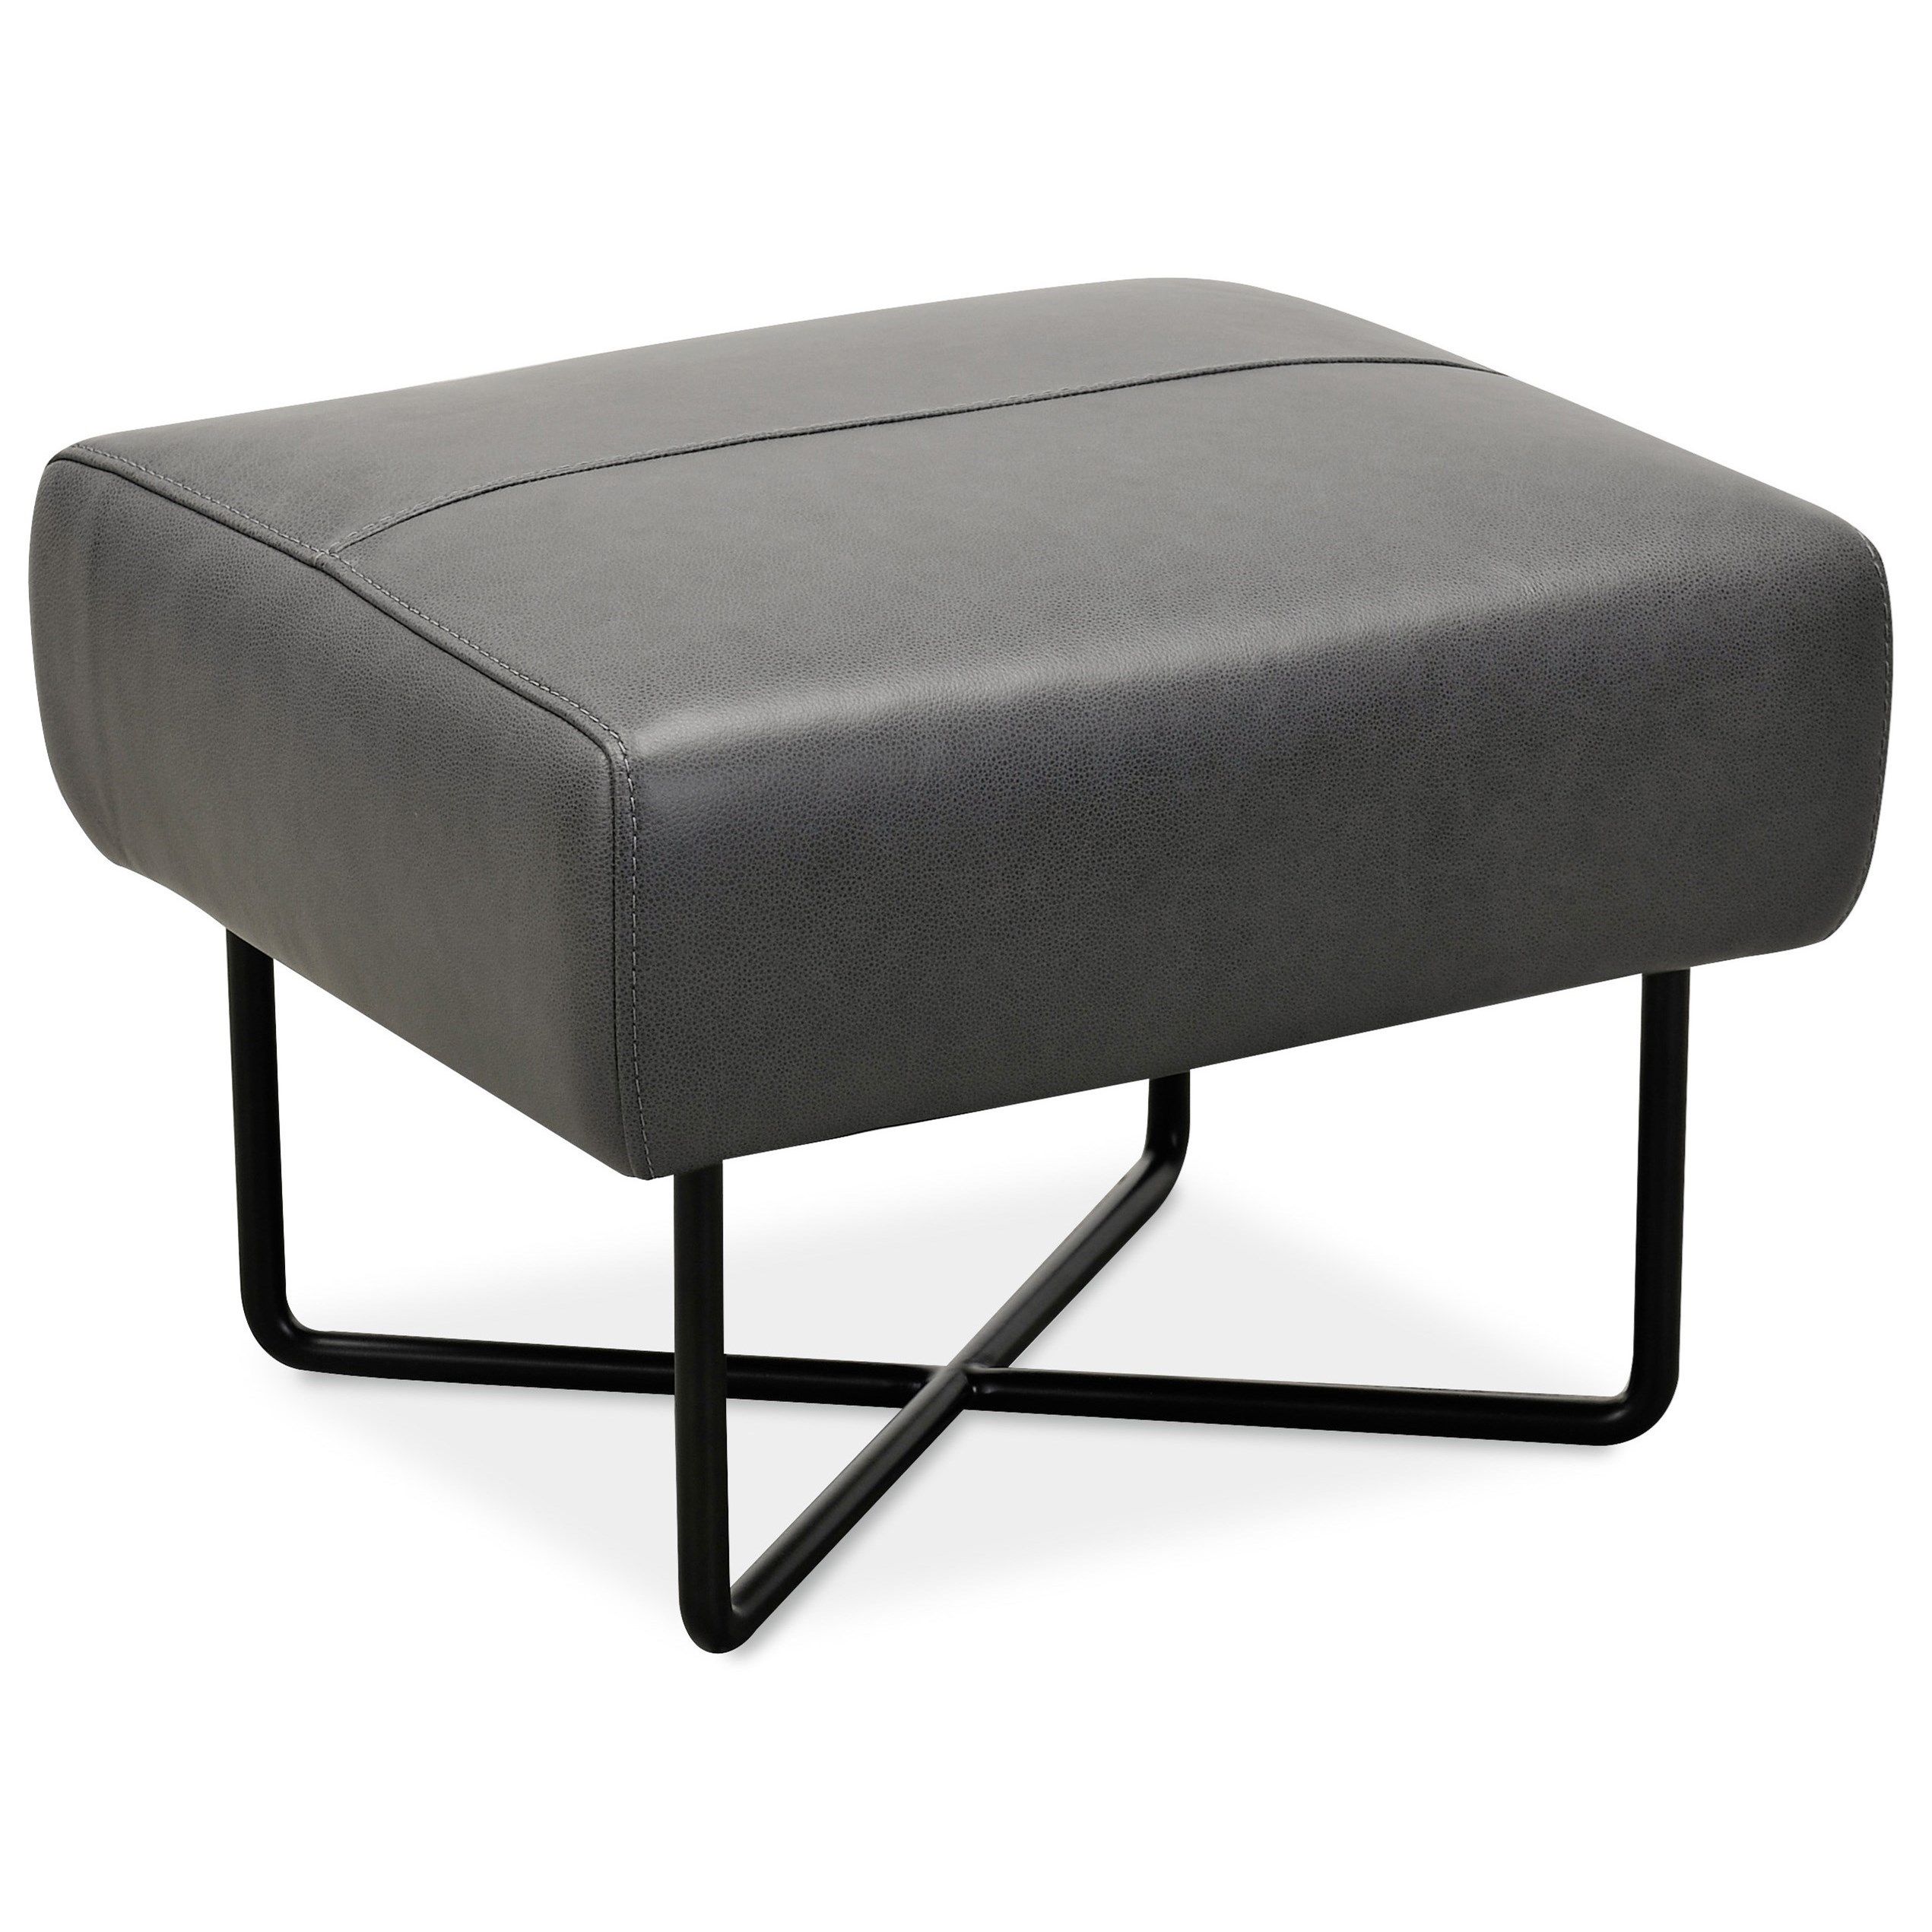 Hooker Furniture Efron Cc443 Ot 097 Gray Leather Ottoman W/ Black Metal Throughout Black Leather And Gray Canvas Pouf Ottomans (View 3 of 20)